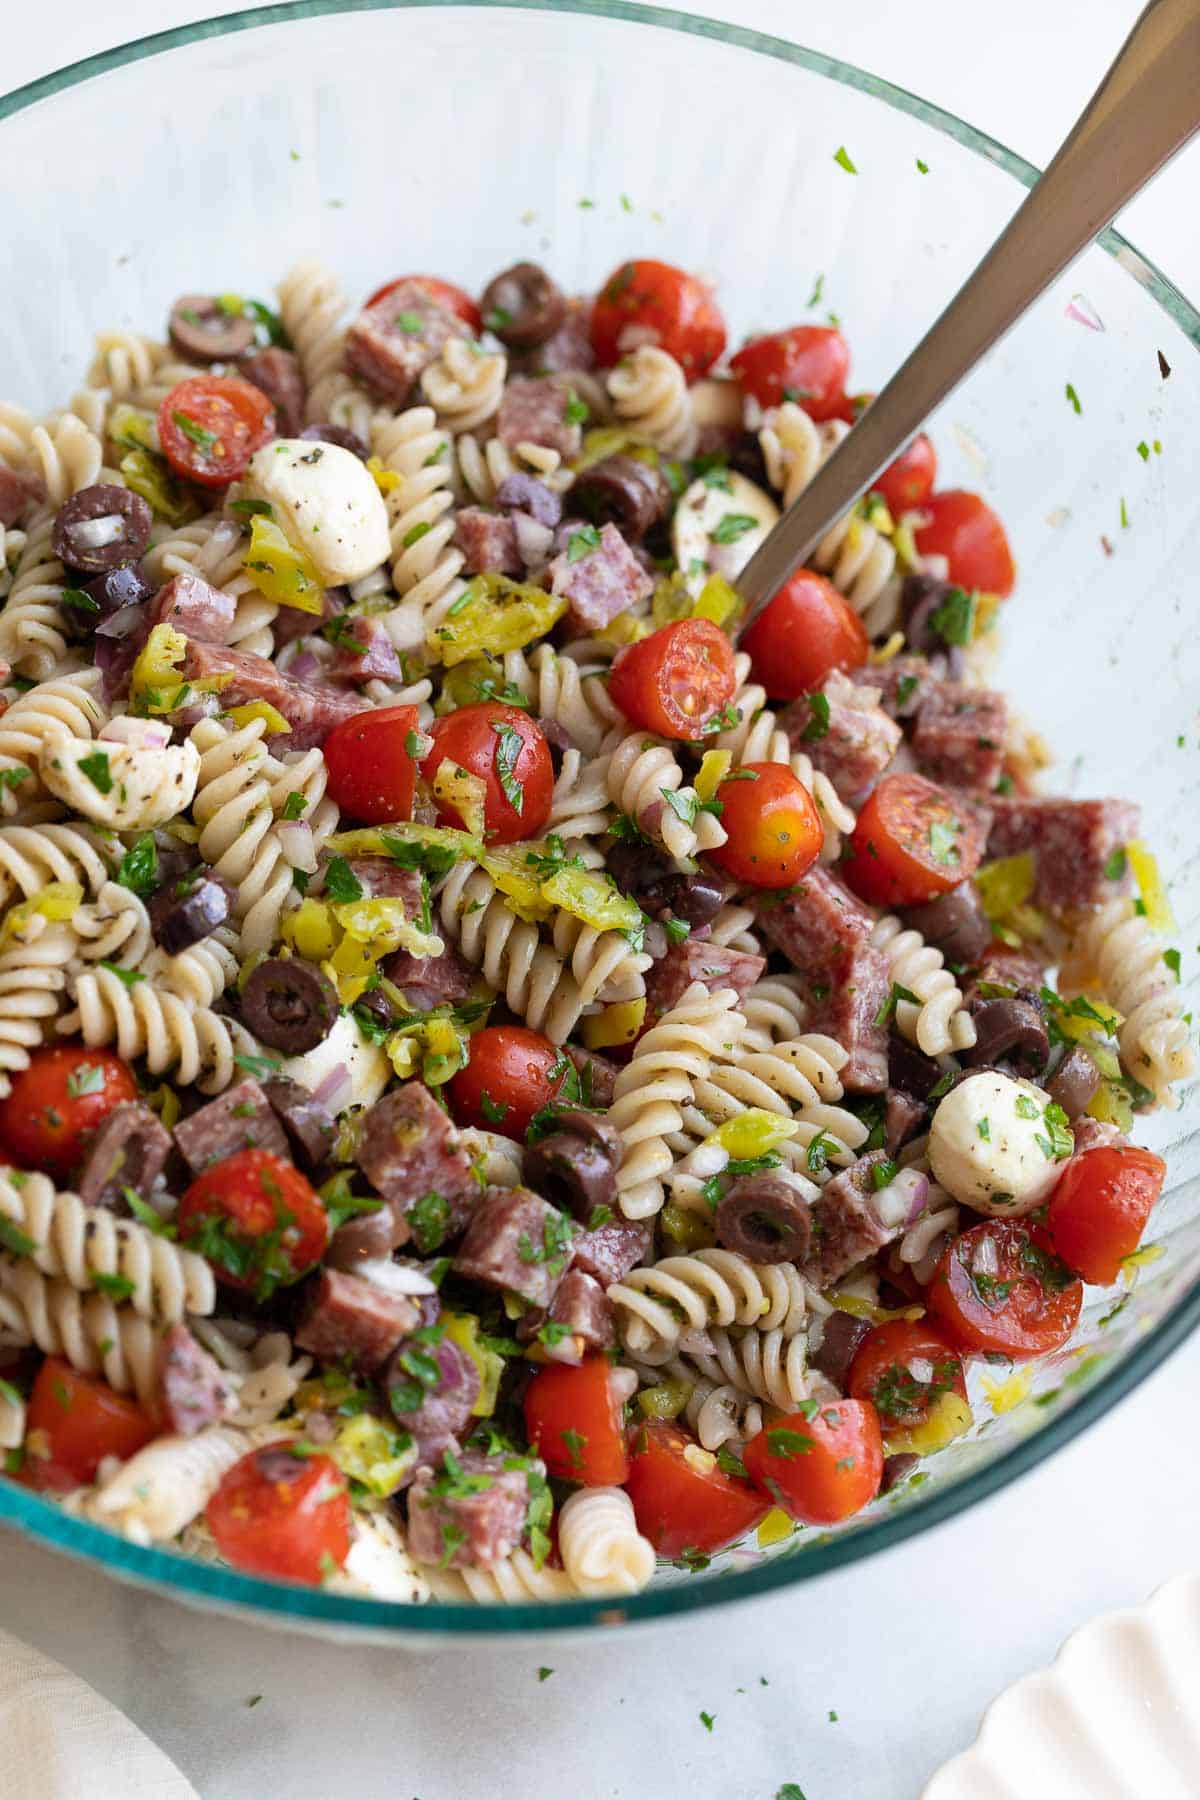 Pasta salad mixed in a large glass bowl